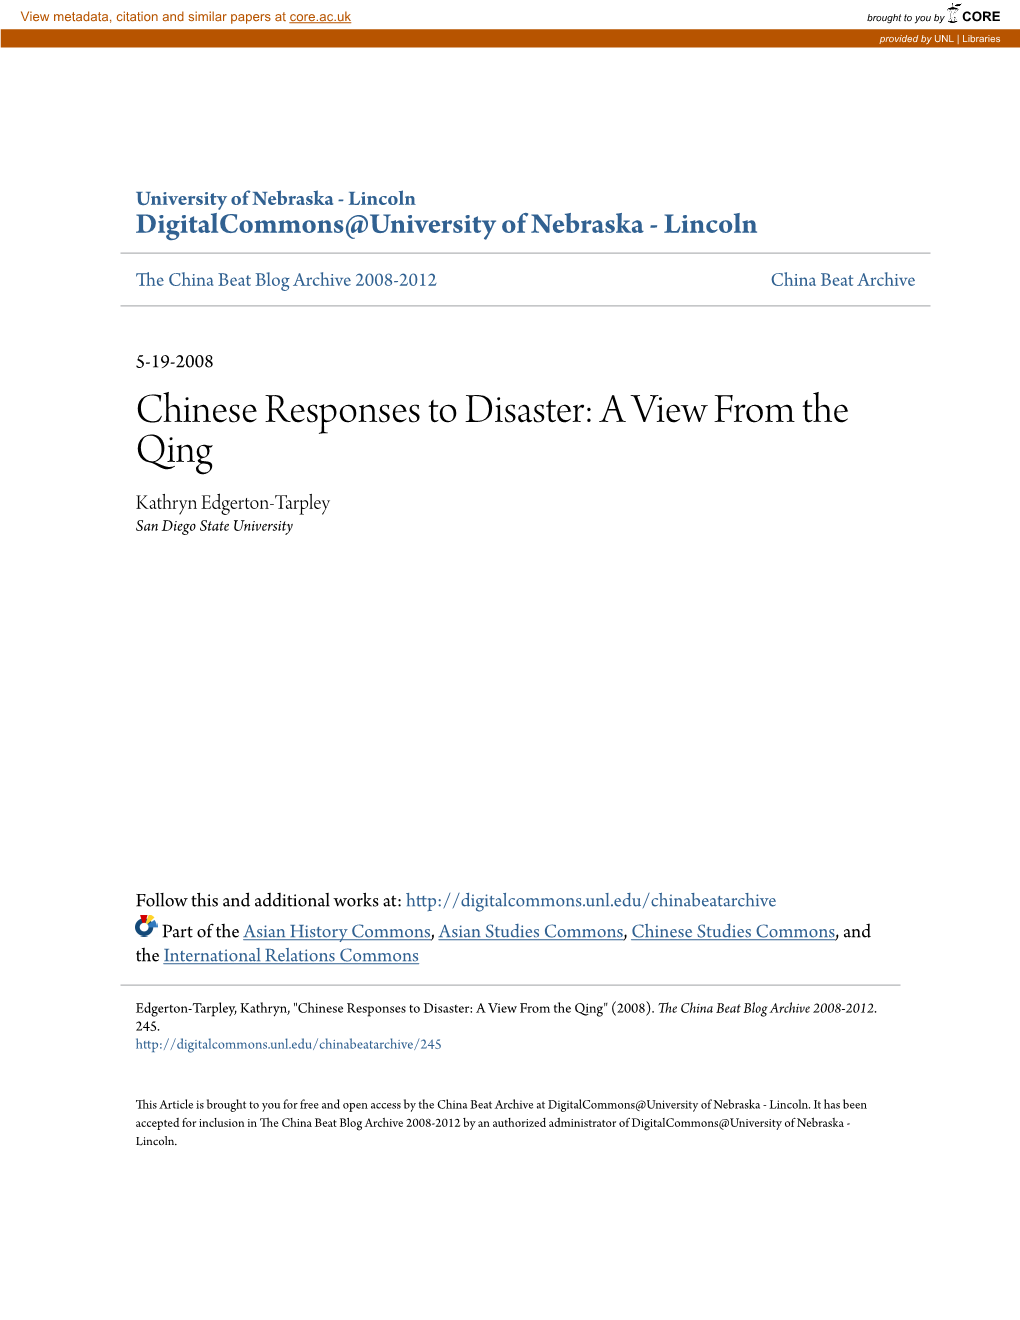 Chinese Responses to Disaster: a View from the Qing Kathryn Edgerton-Tarpley San Diego State University